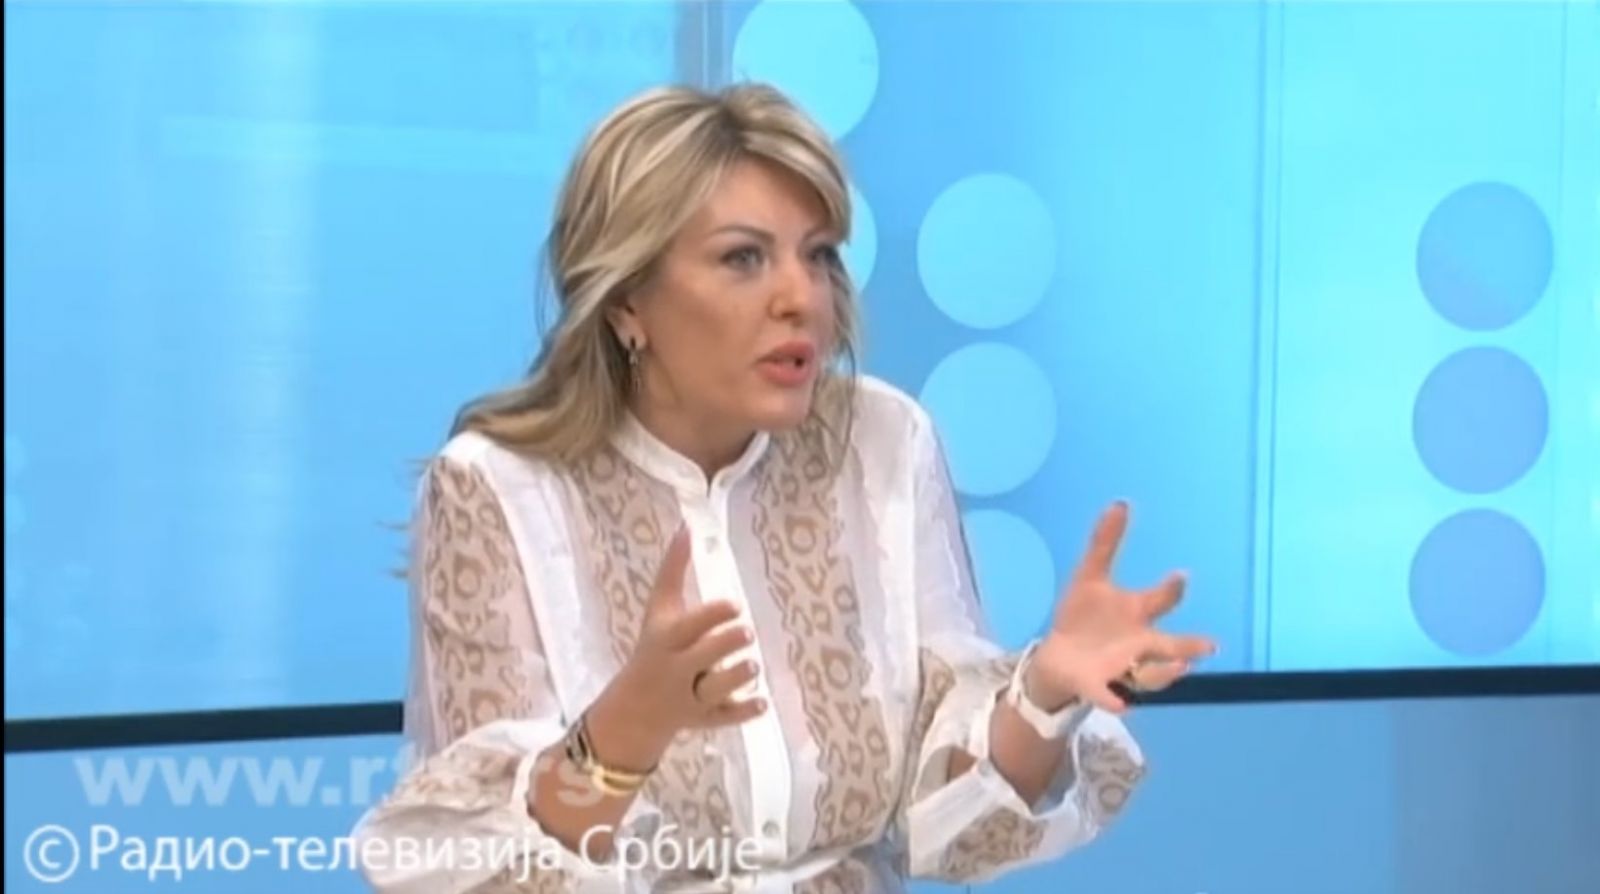 J. Joksimović: Results in given circumstances good – we can do better